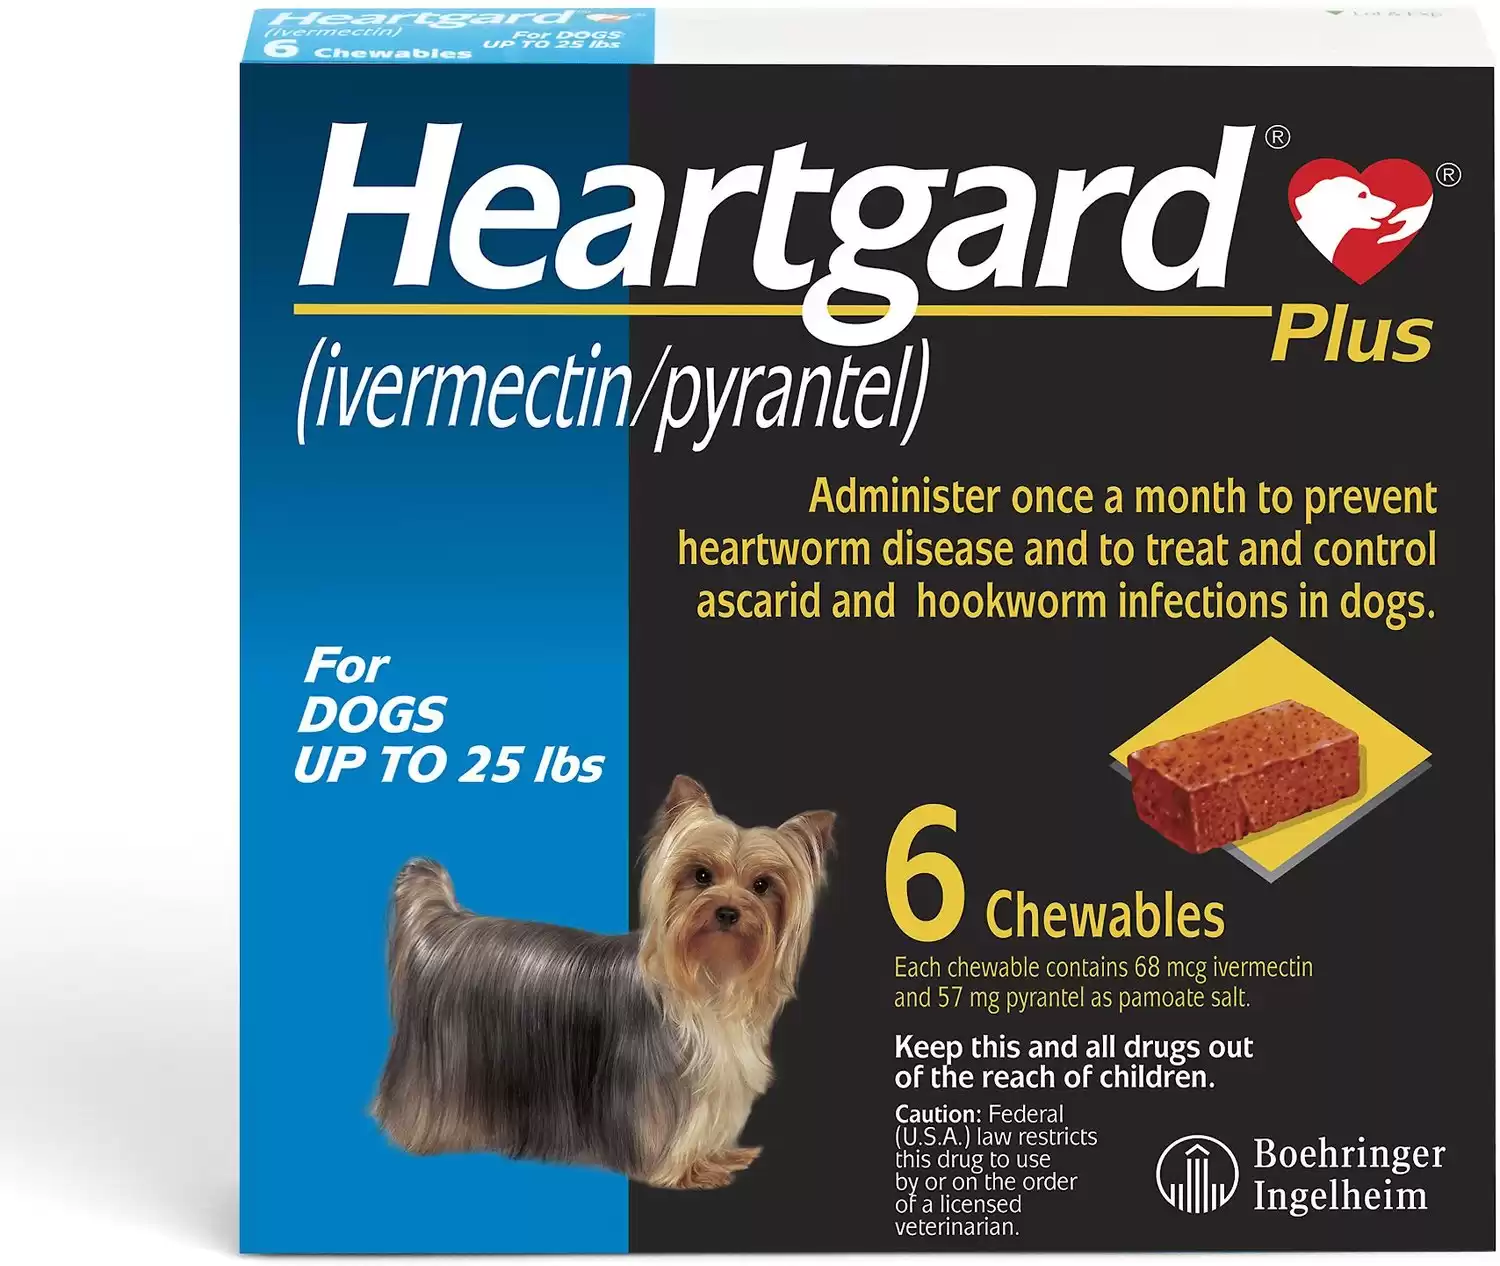 Heartgard Plus Chewable Tablets for Dogs